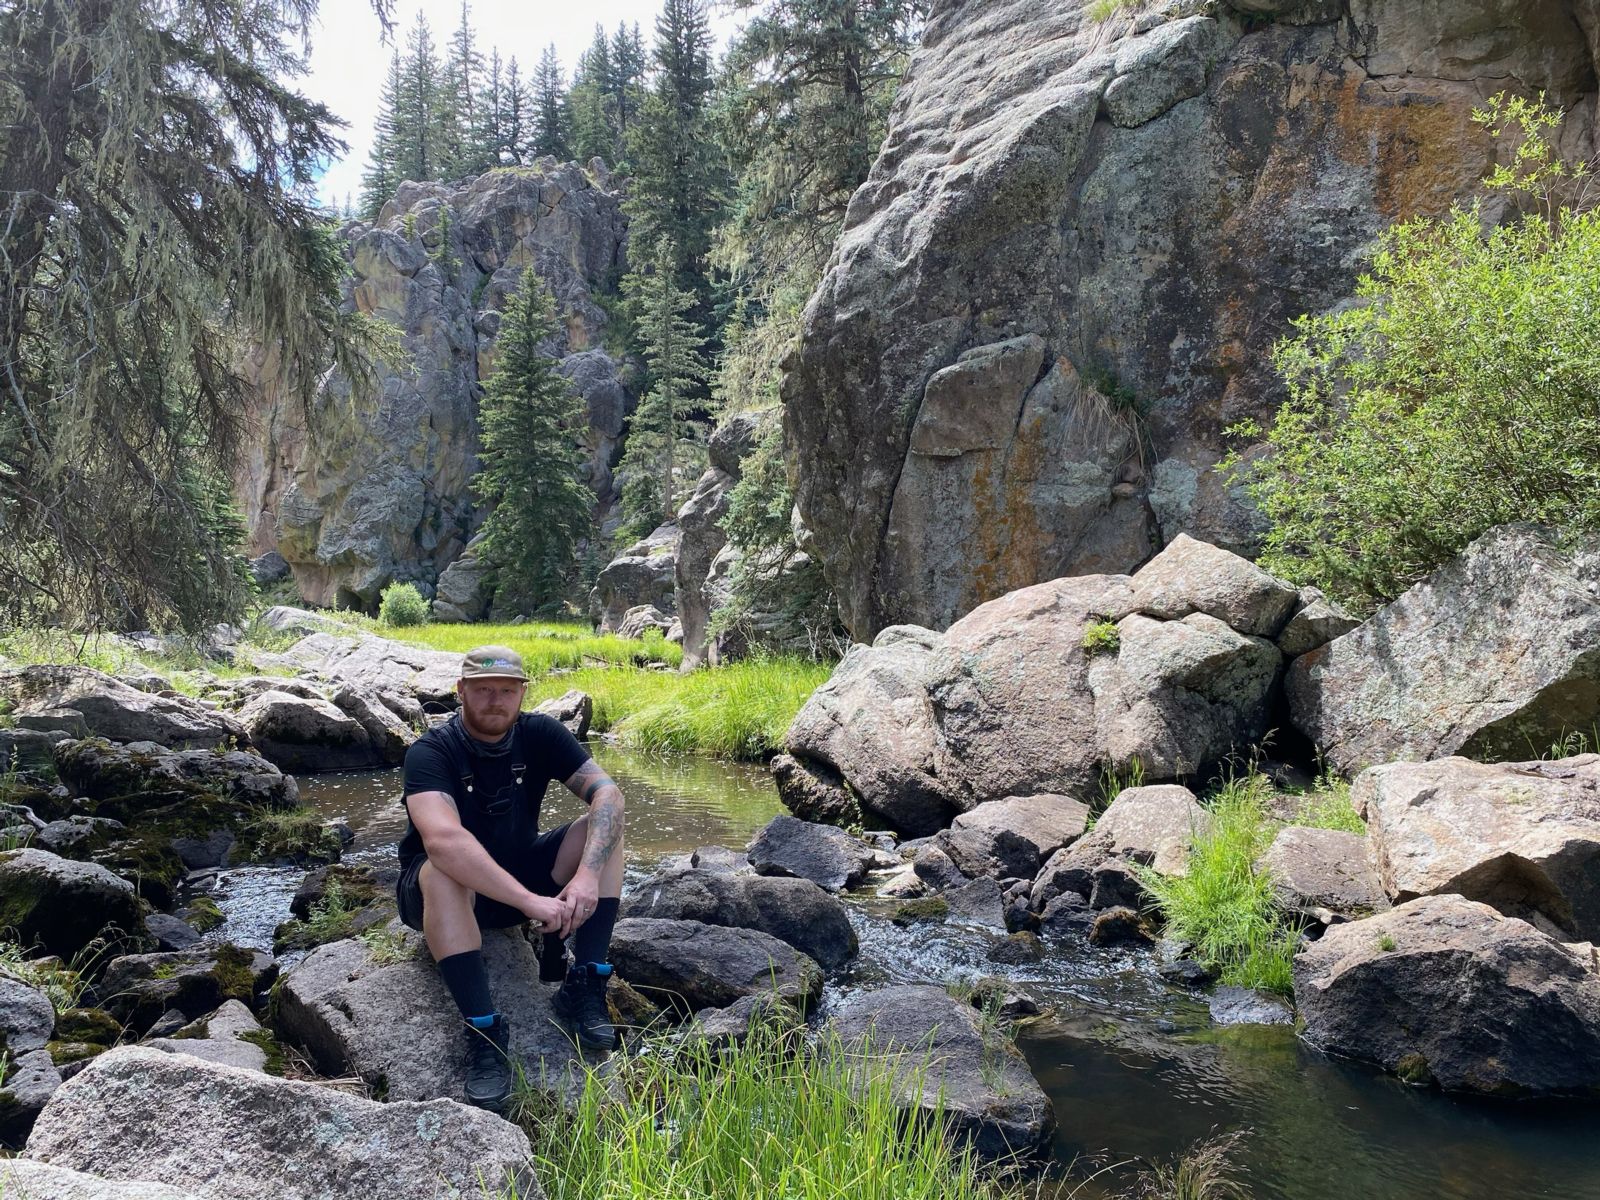 Brad Kirouac of Hello Ranger (with his gator mask around his neck) visited Valles Caldera National Preserve in New Mexico which gets just a few thousand visitors each year – reducing risk and spread opportunities of COVID-19. Photo credit Hello Ranger